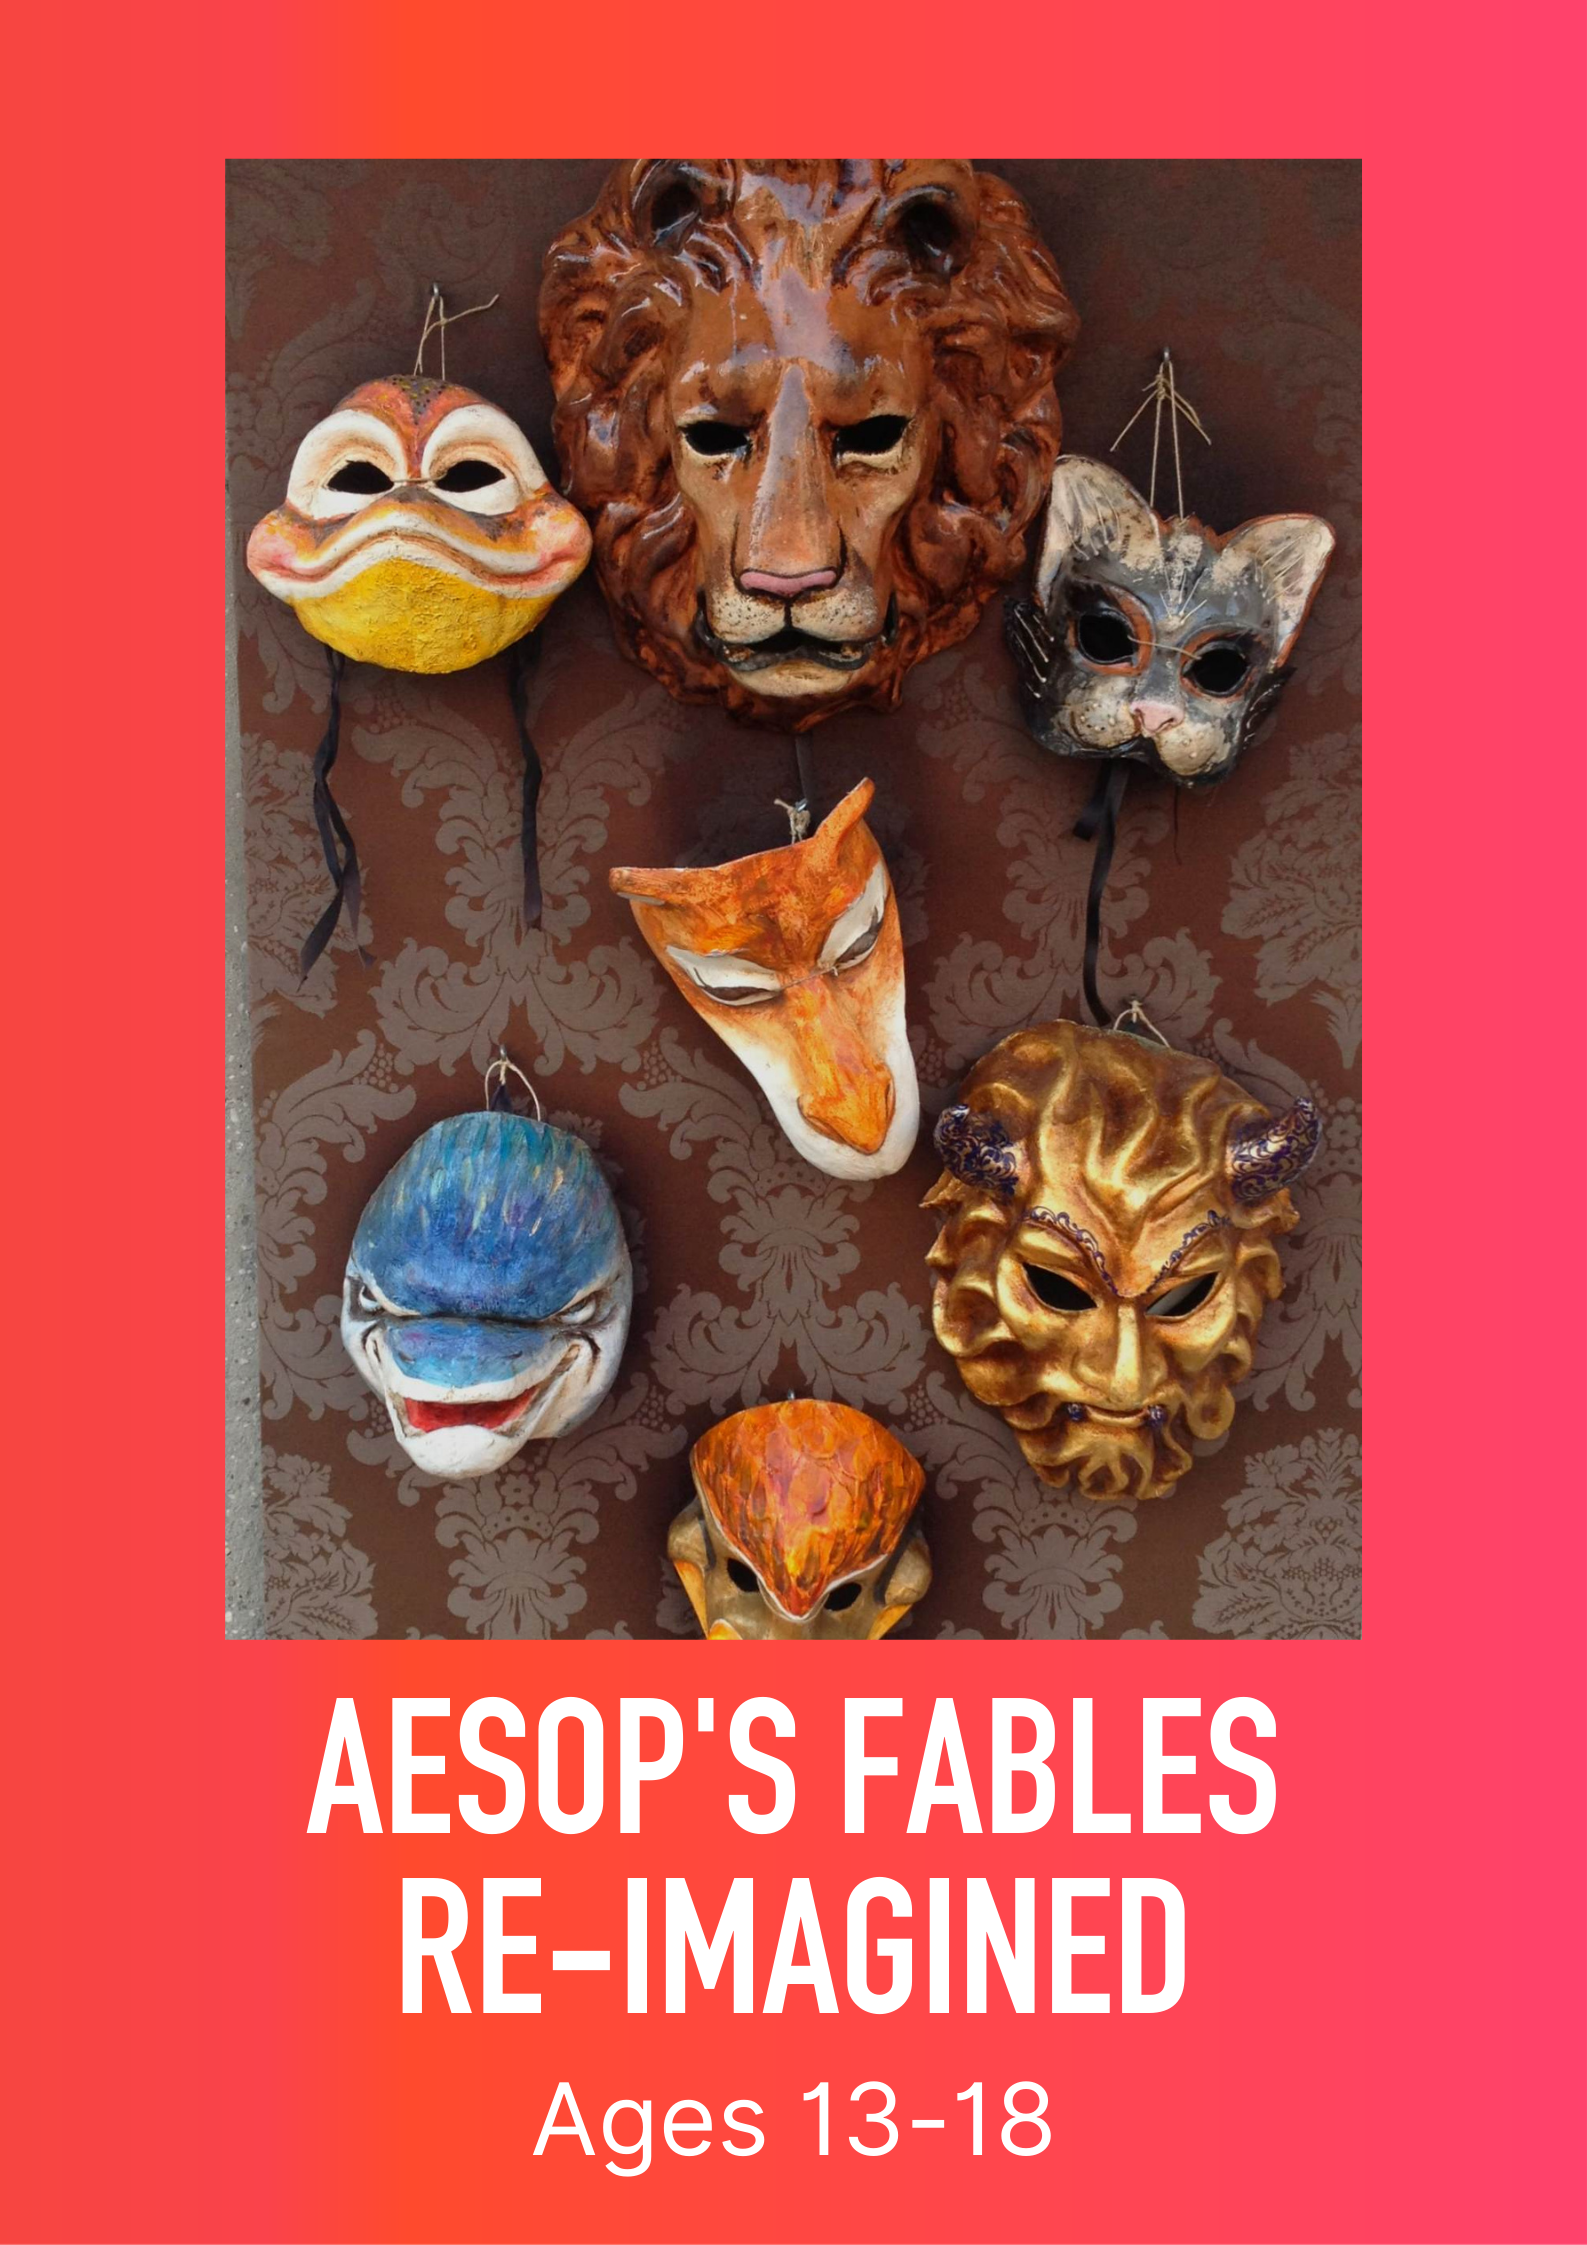 A poster showing masks for Aesop's fables ages 13-18